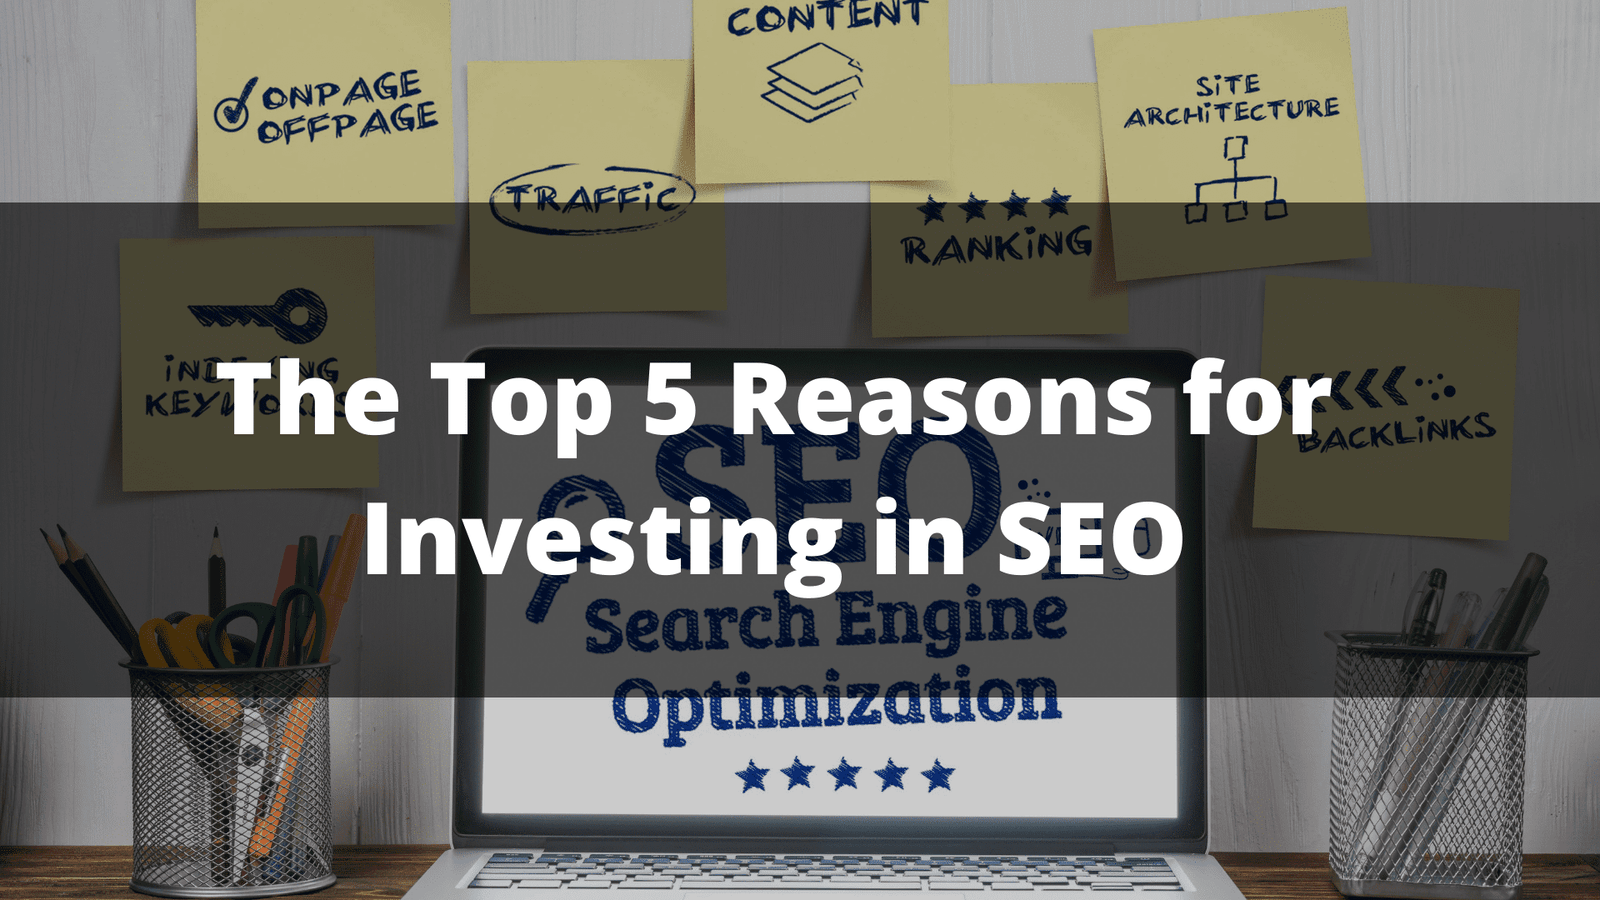 The Top 5 Reasons for Investing in SEO